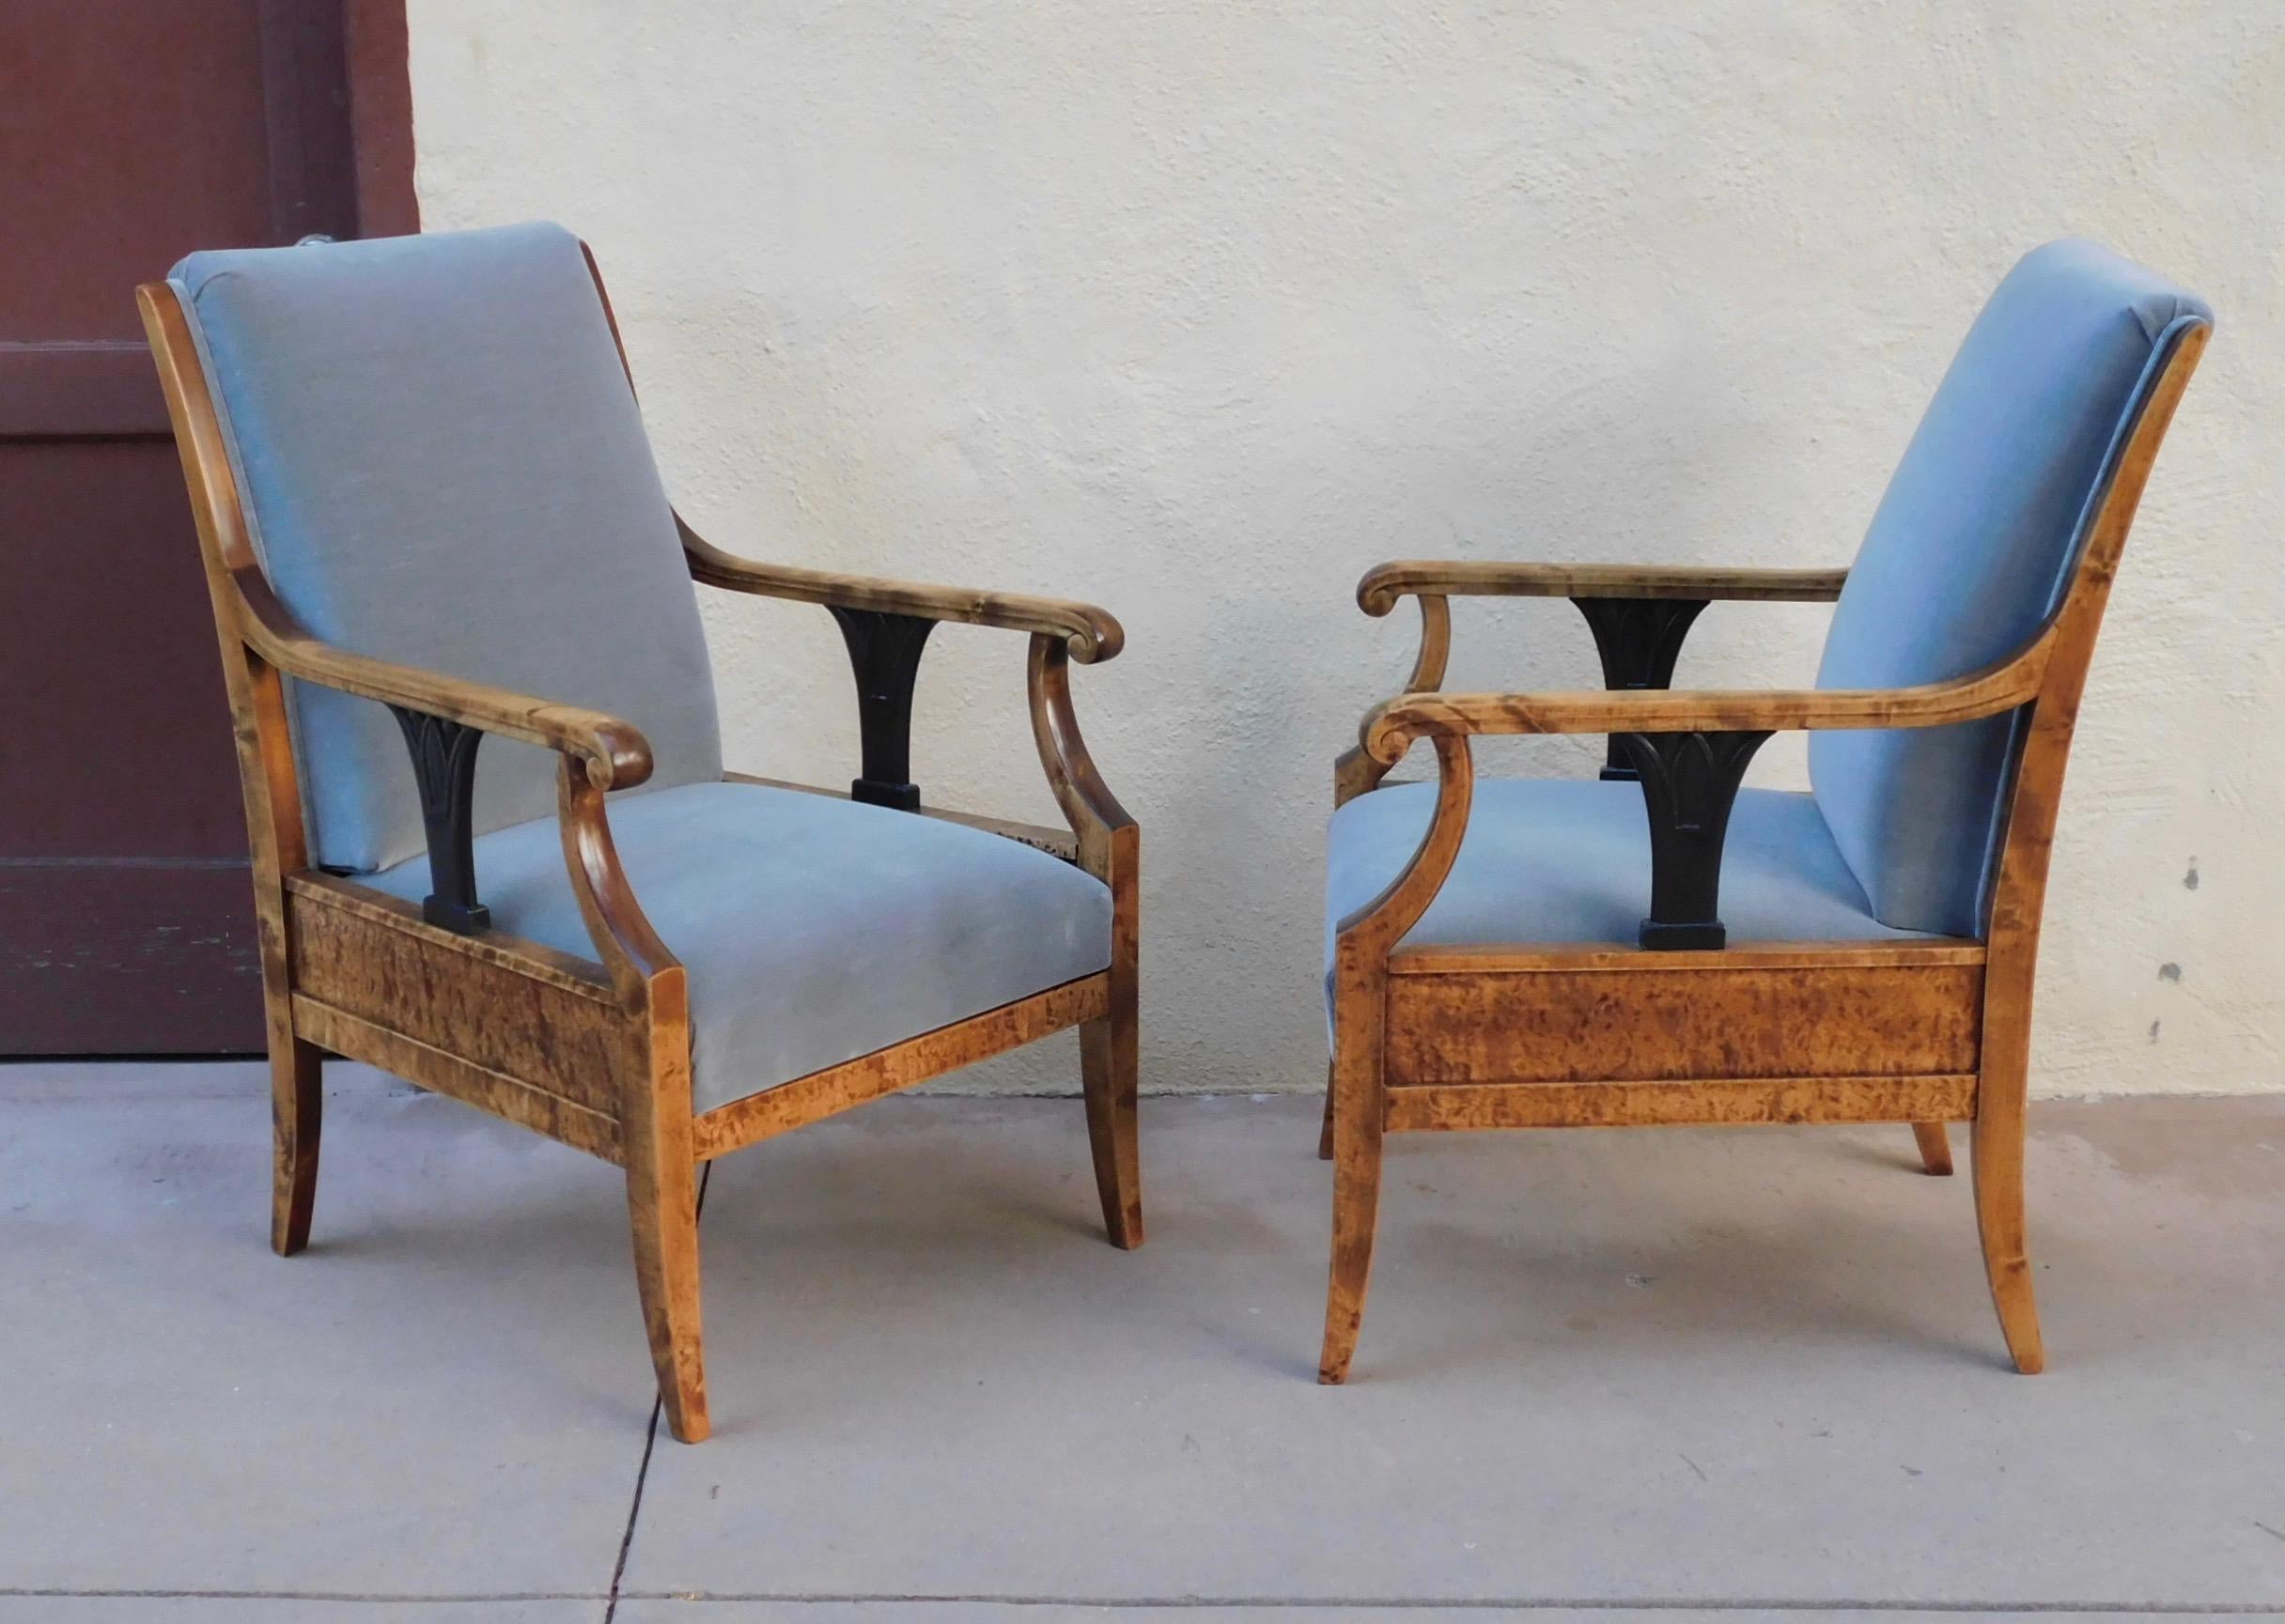 Early 20th Century Pair of Swedish Biedermeier Revival Armchairs in Golden Flame Birch, circa 1920 For Sale